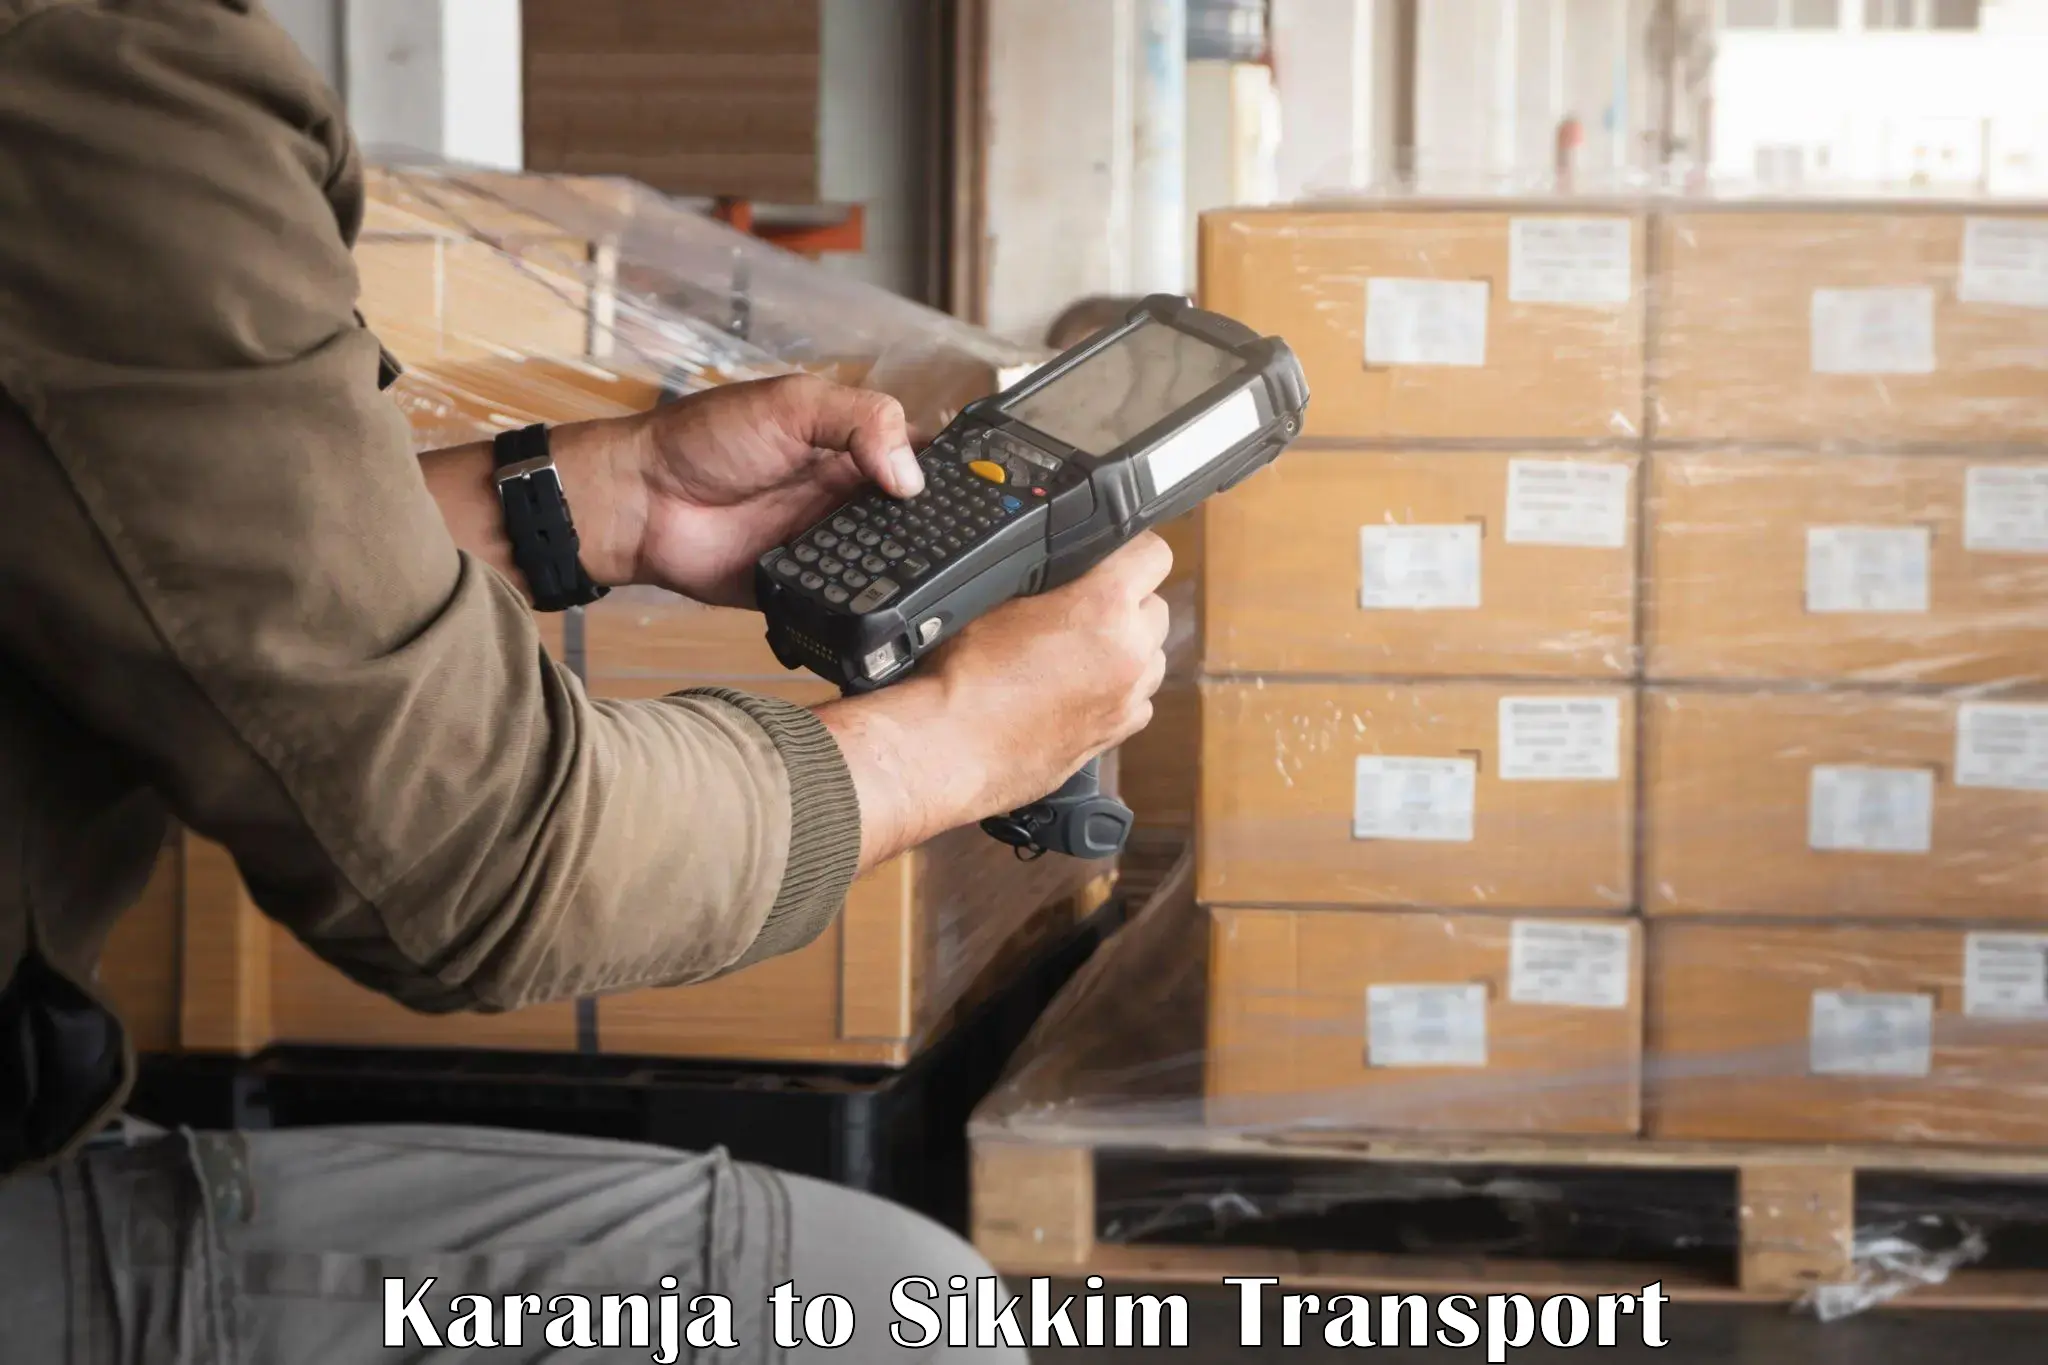 Vehicle courier services Karanja to Pelling